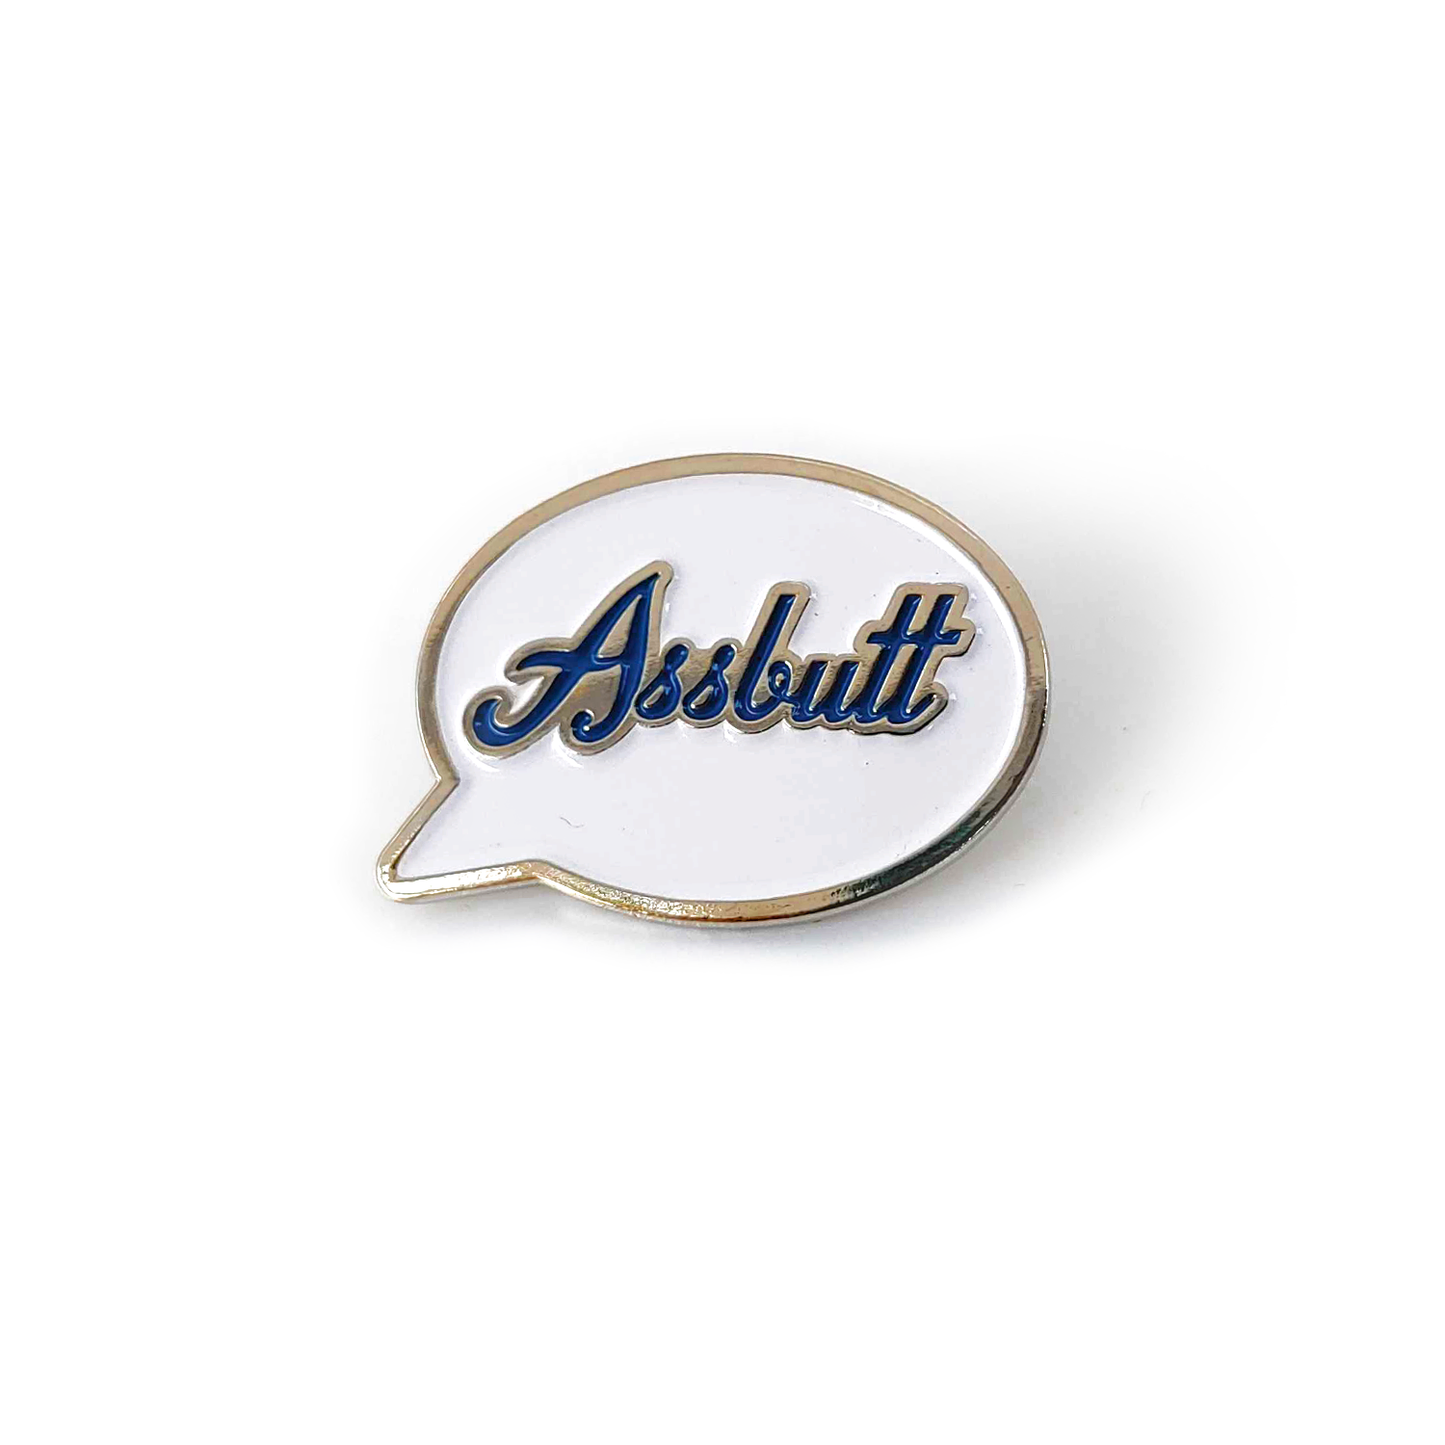 A silver pin with a white front in the shape of a speech bubble. The word "Assbutt" is written in blue script font.